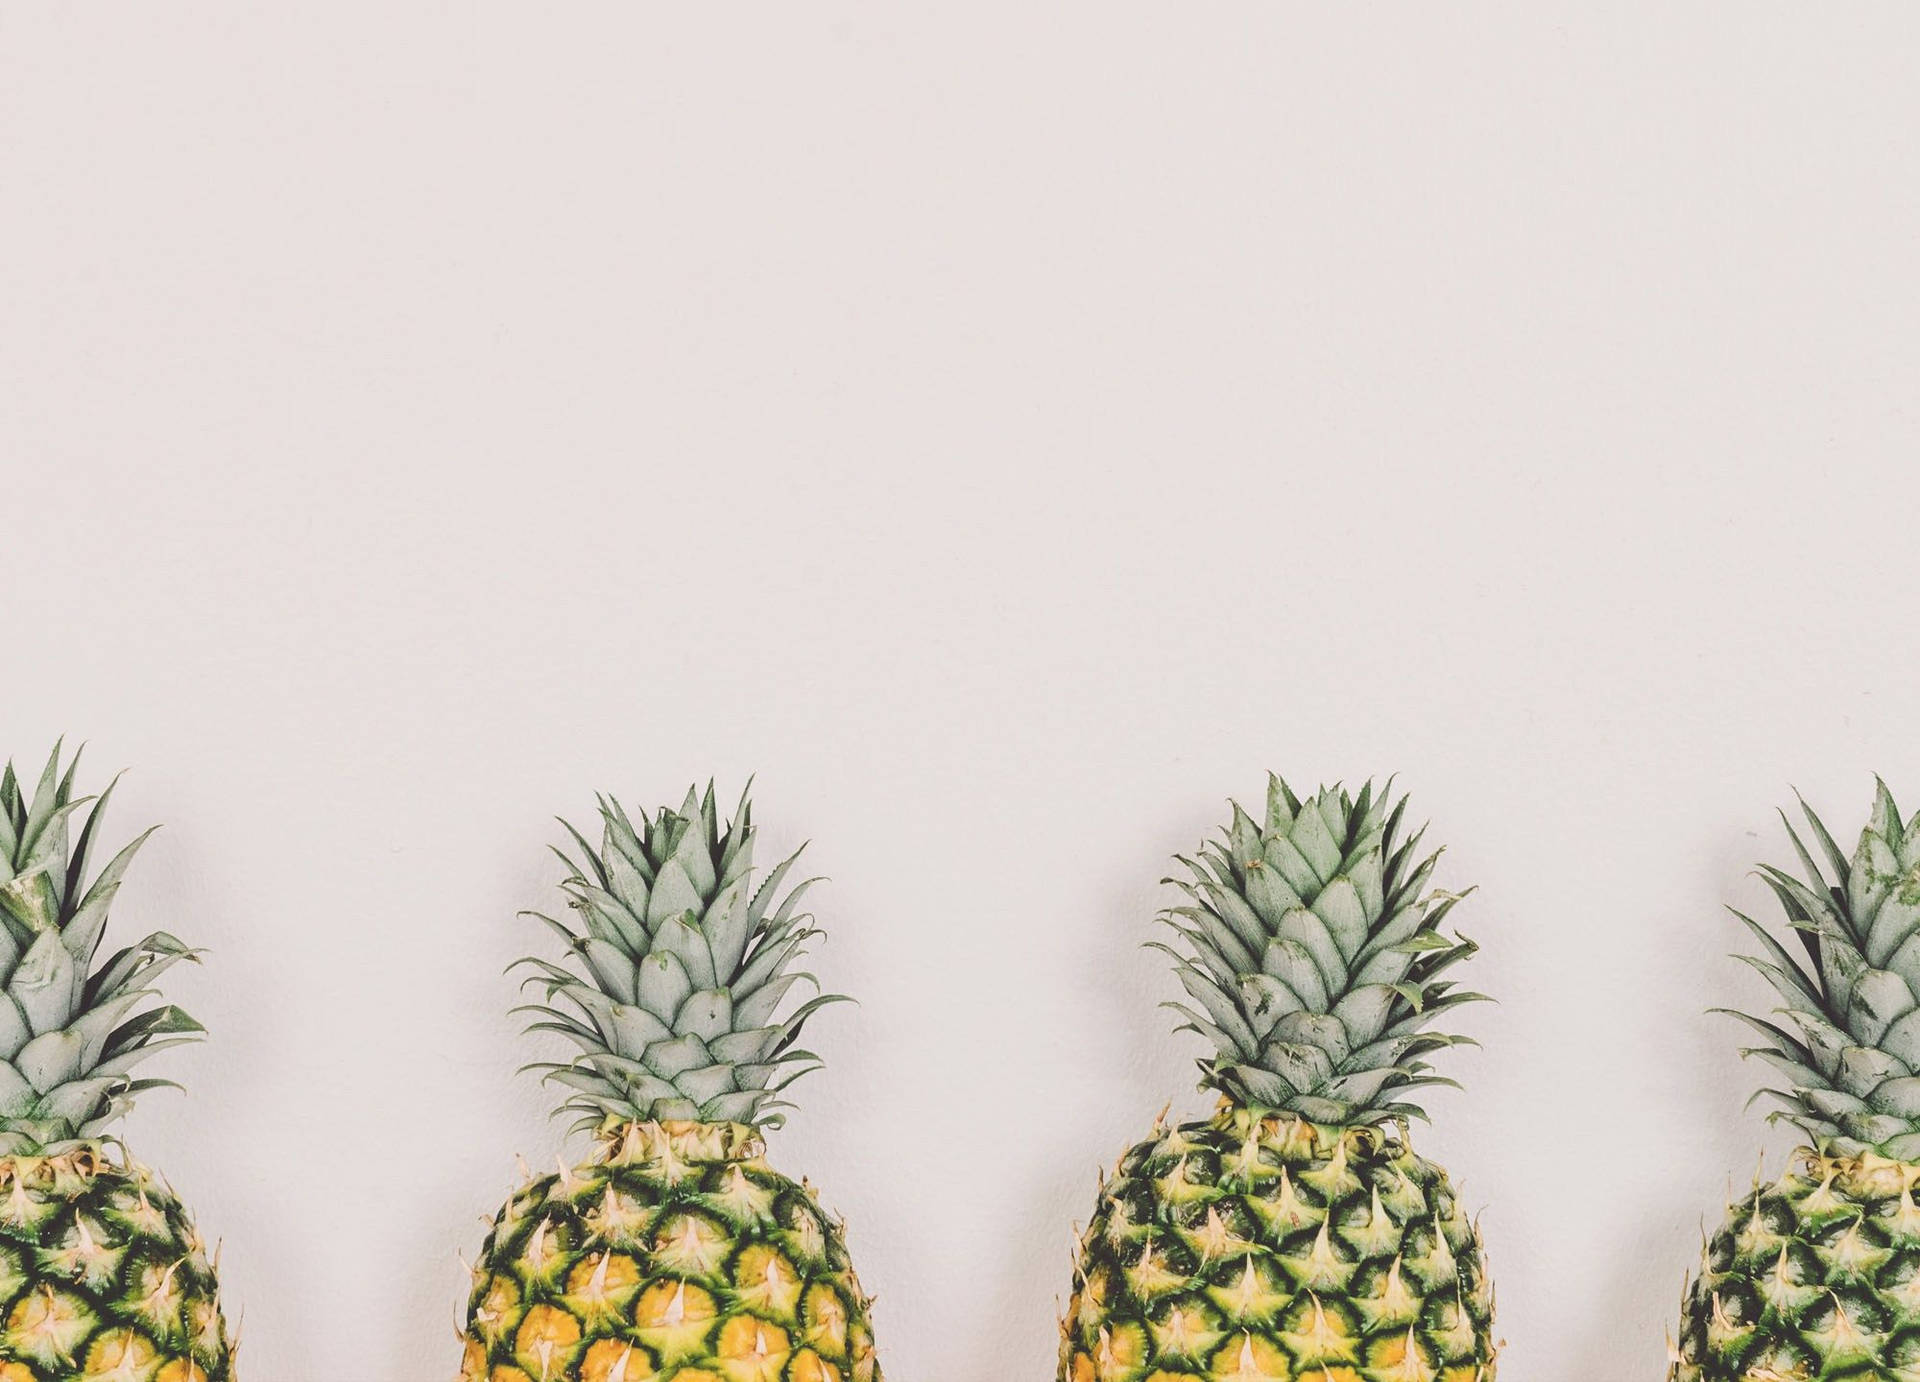 An array of pineapples of different sizes, shapes, and colors all lined up side by side. Wallpaper